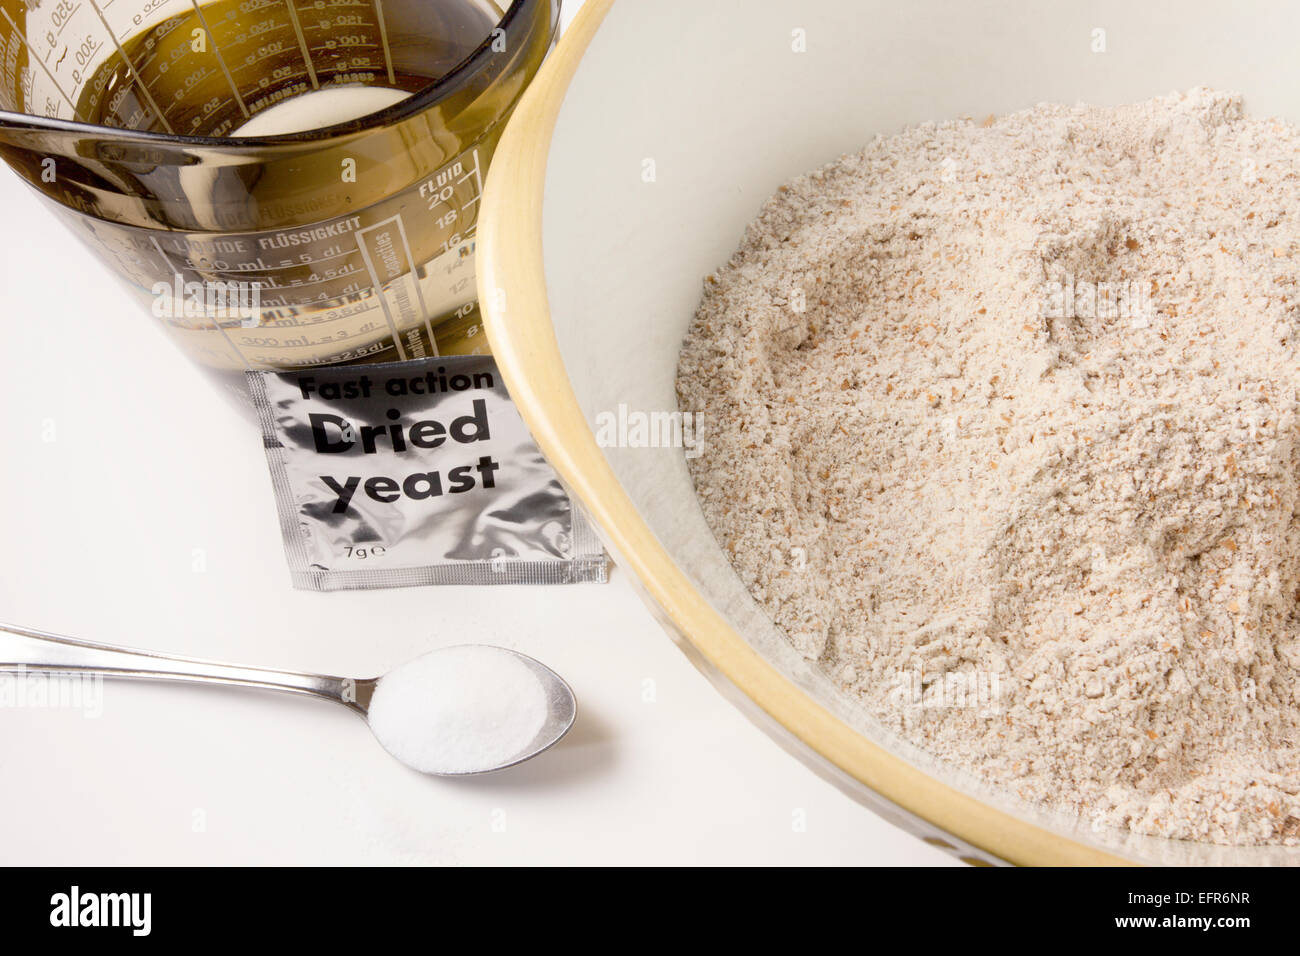 Stoneground Wholemeal Flour Water Salt and Yeast Bread Making Ingredients Stock Photo